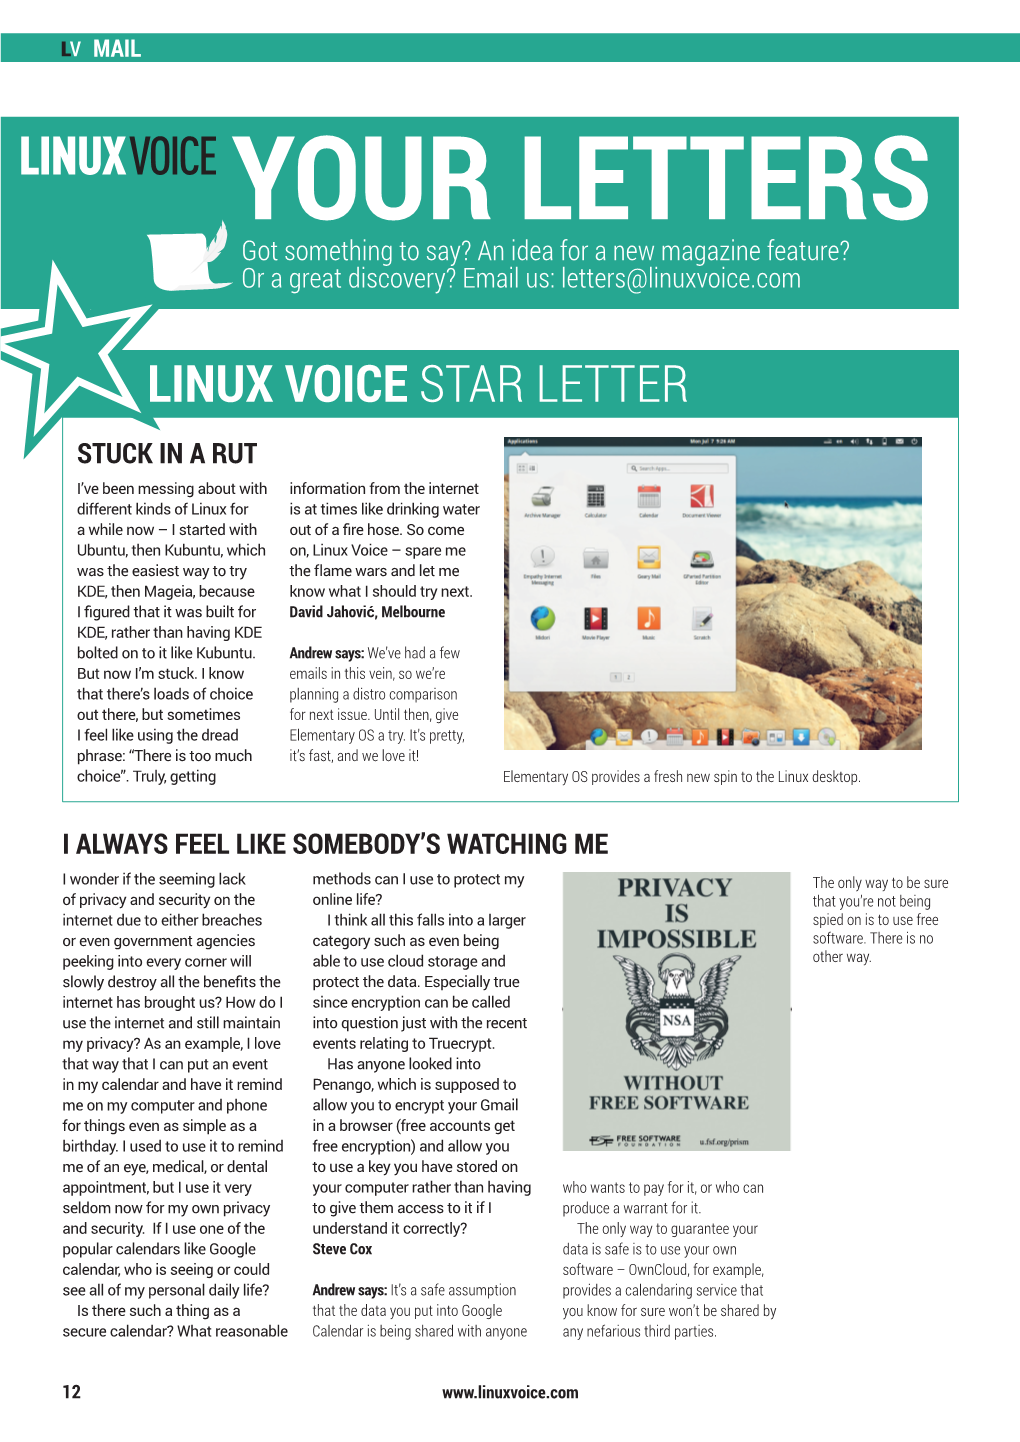 YOUR LETTERS Got Something to Say? an Idea for a New Magazine Feature? Or a Great Discovery? Email Us: Letters@Linuxvoice.Com